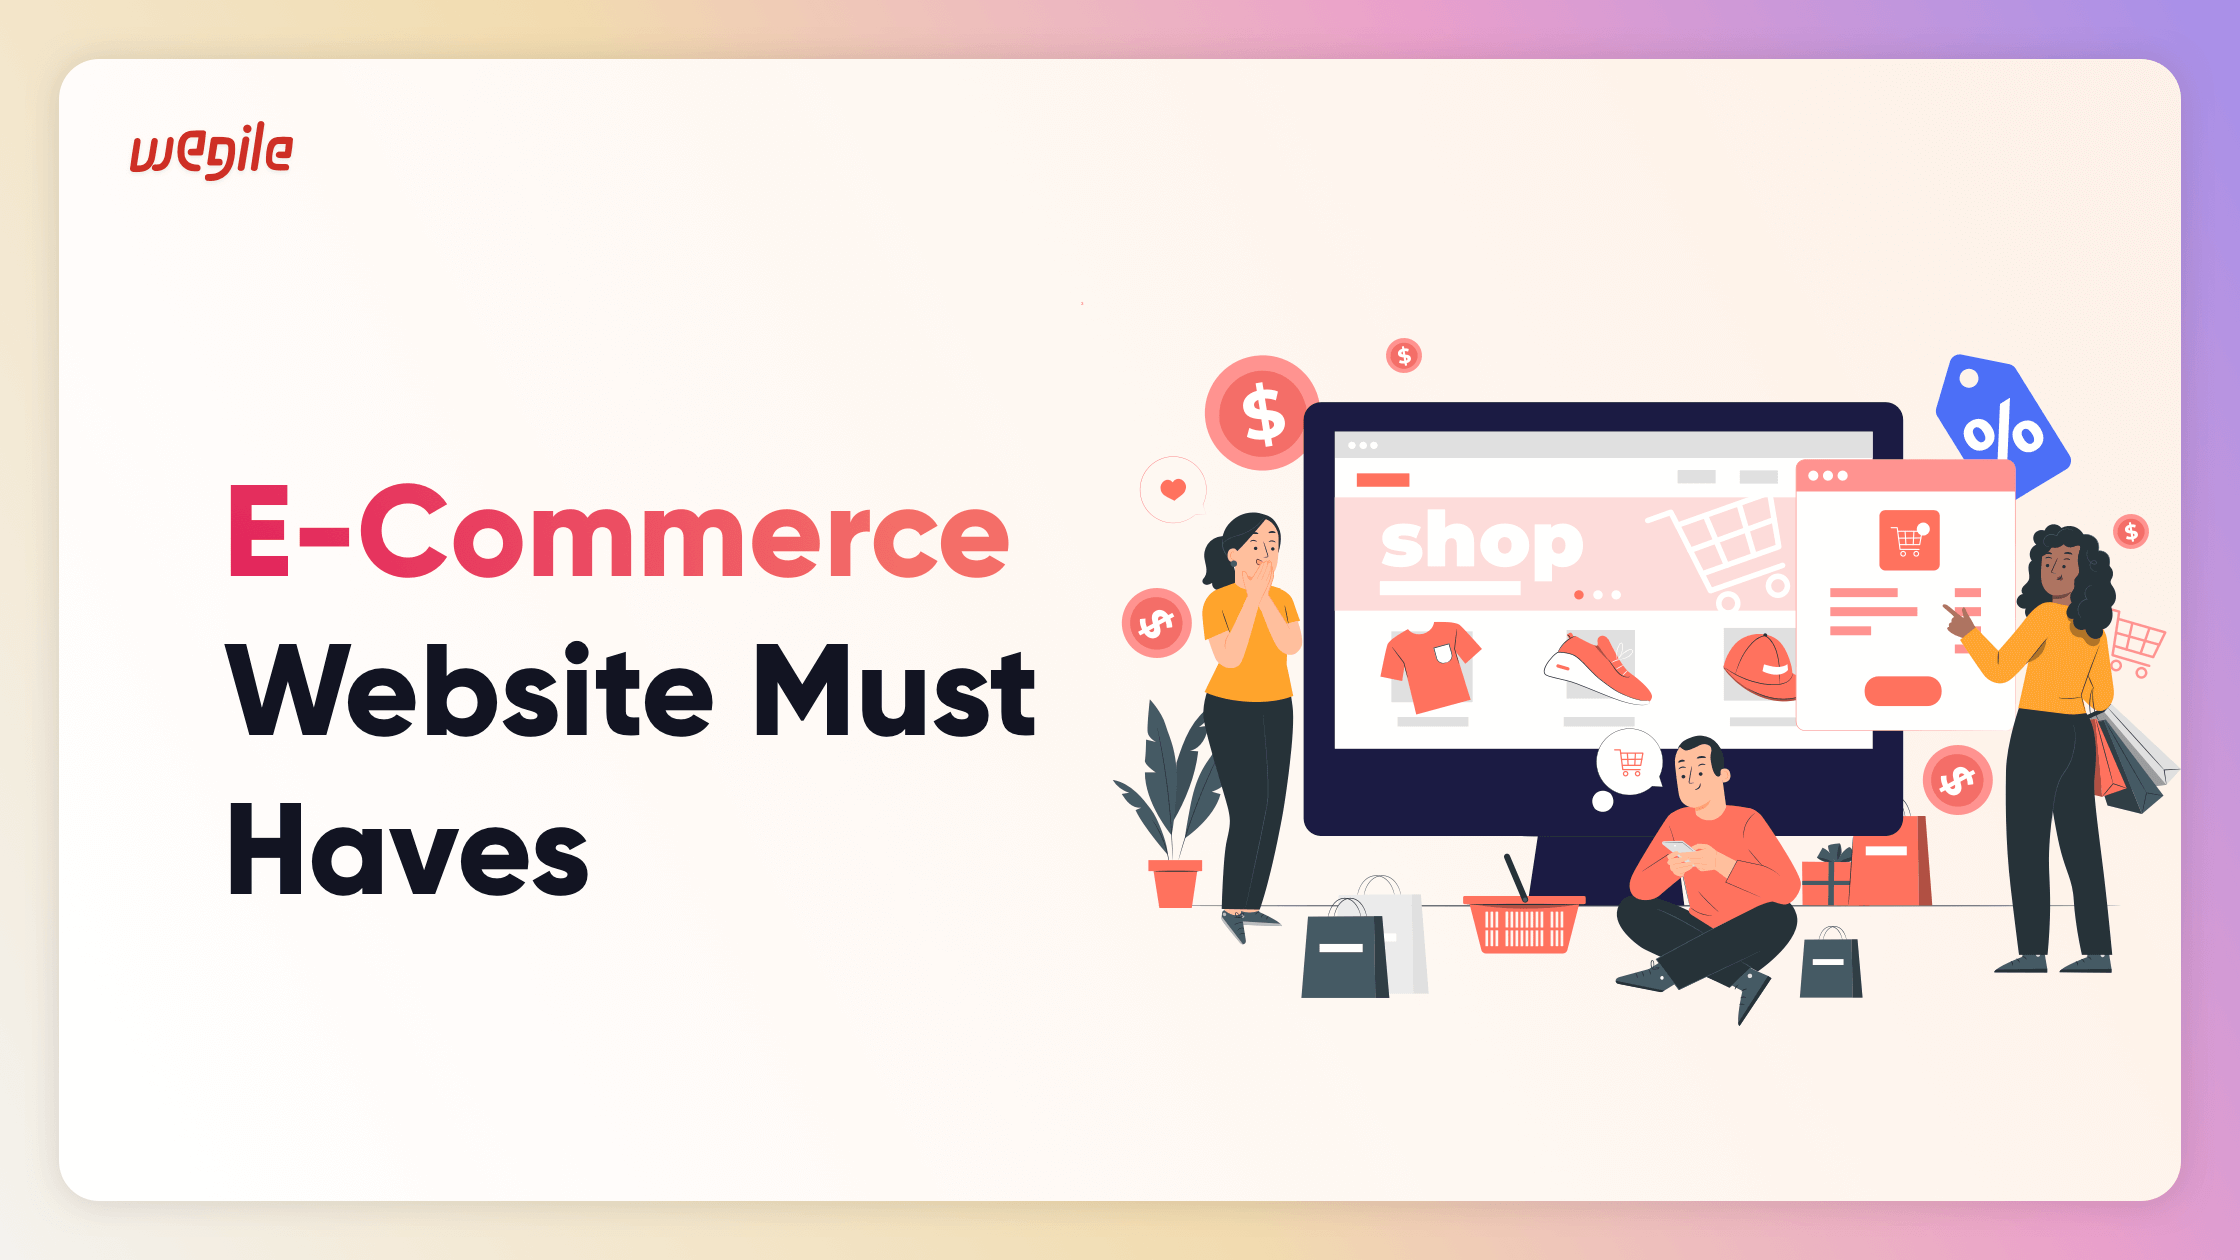 Tips for driving traffic for your e-commerce website